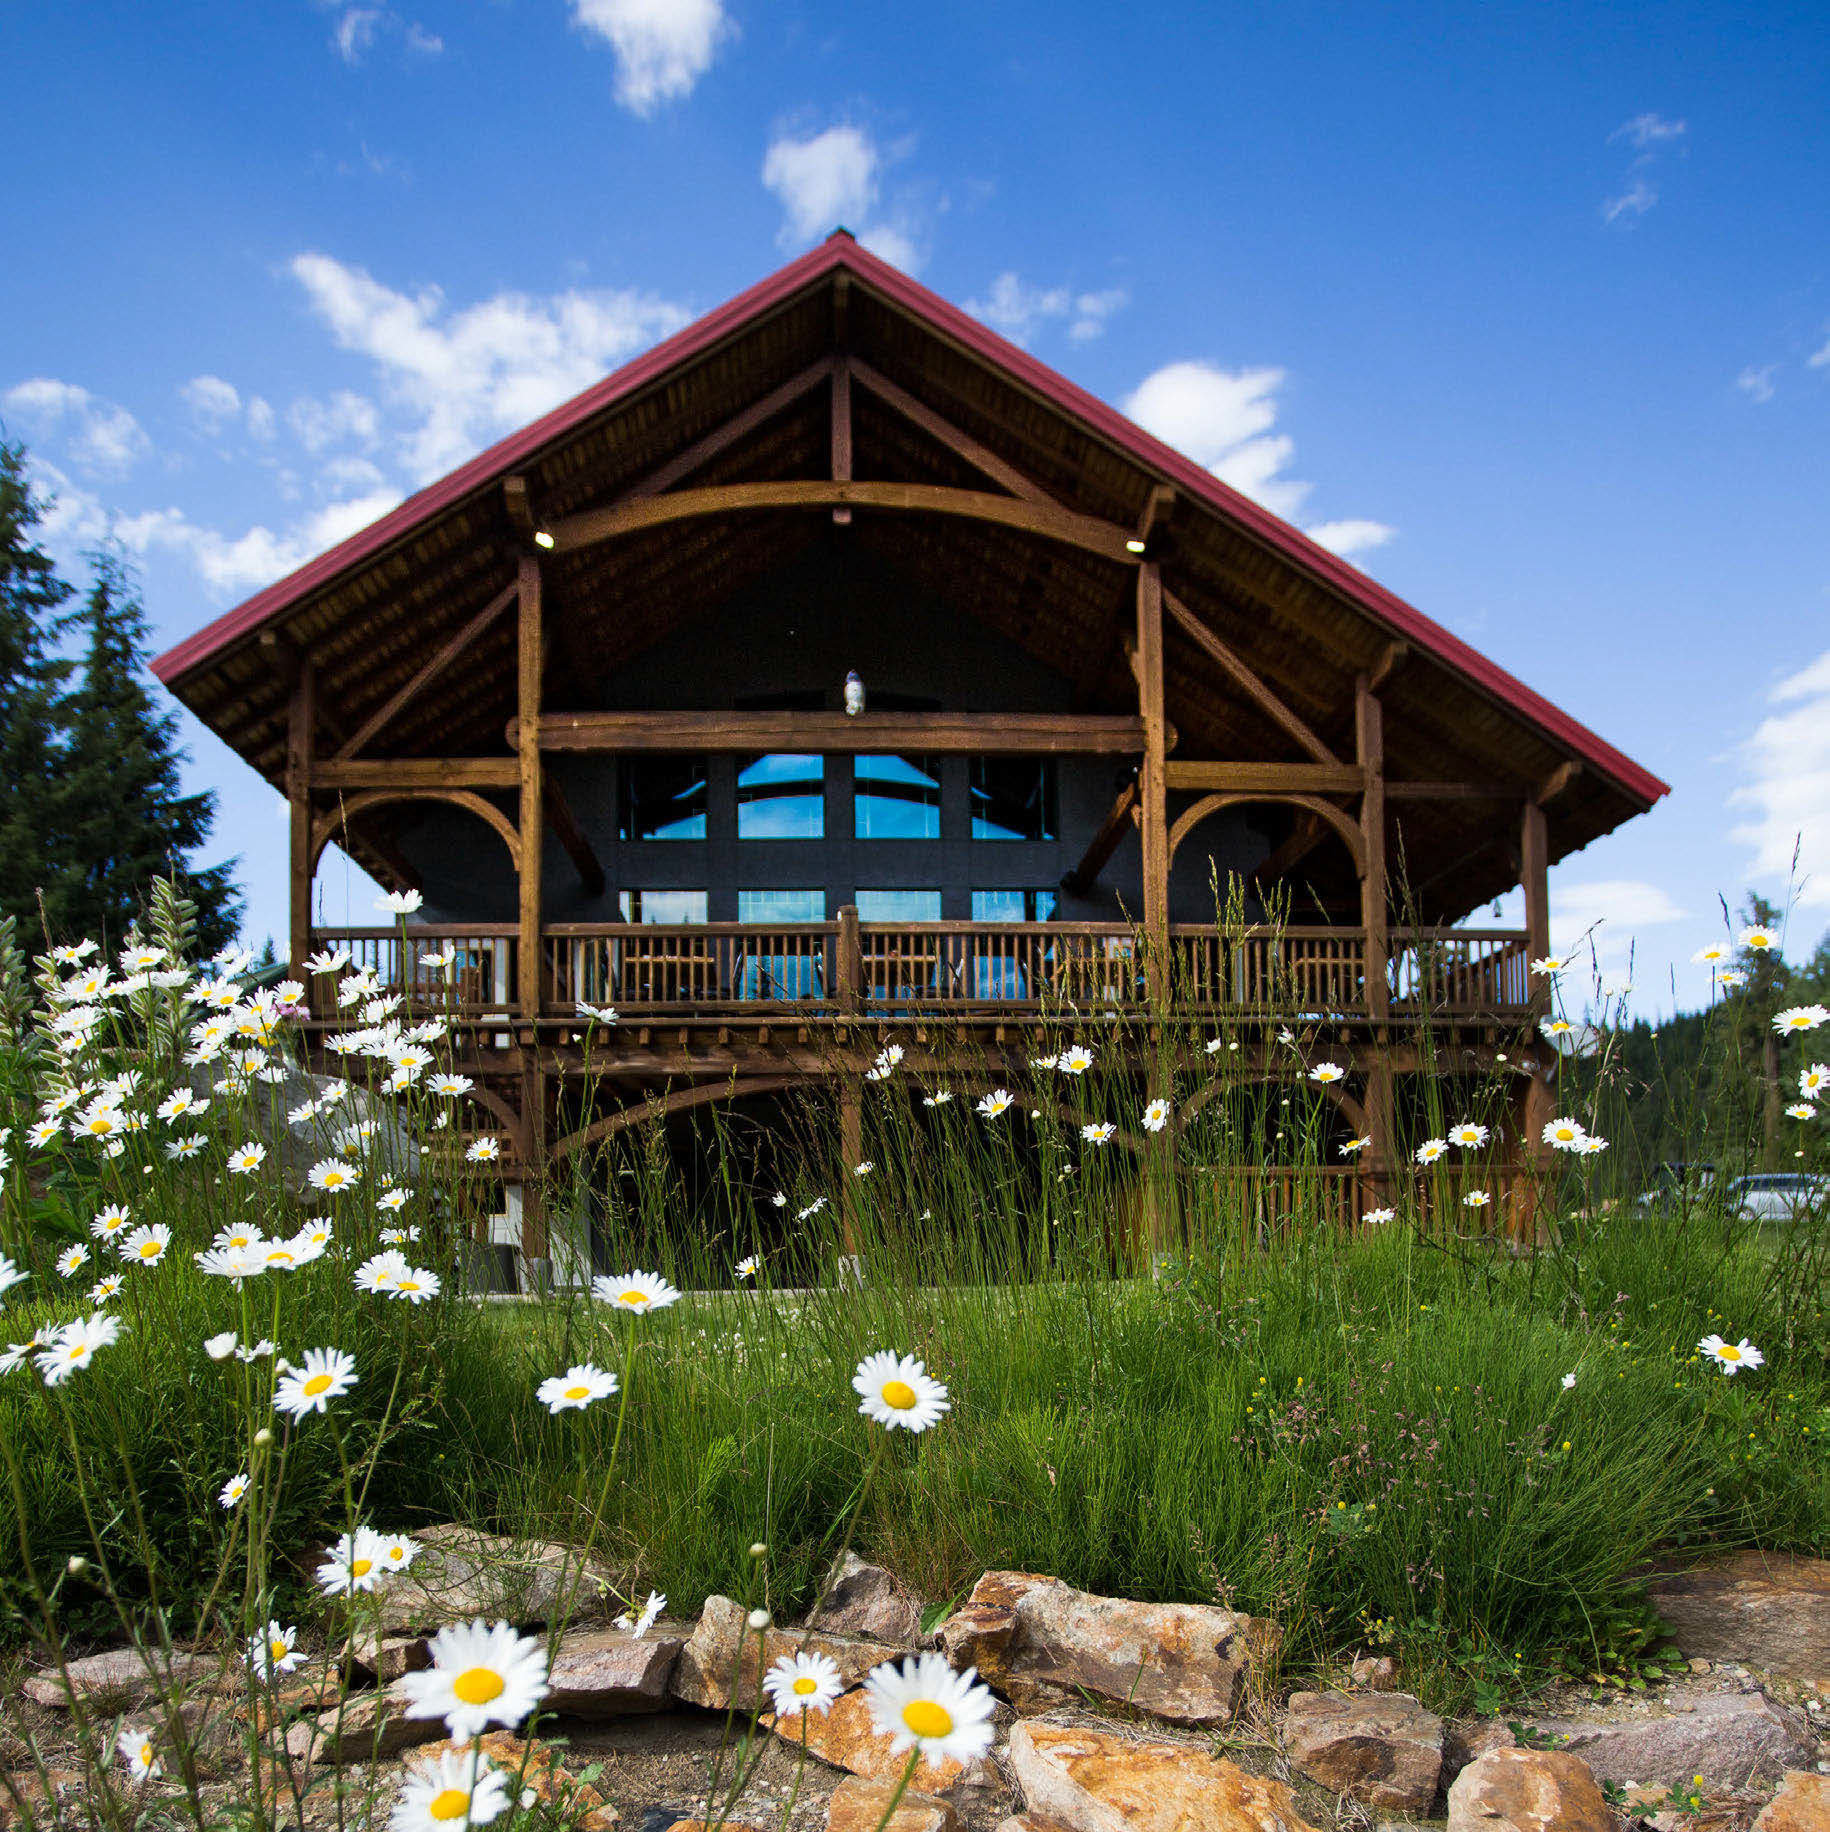 Daisies in front of the lodge